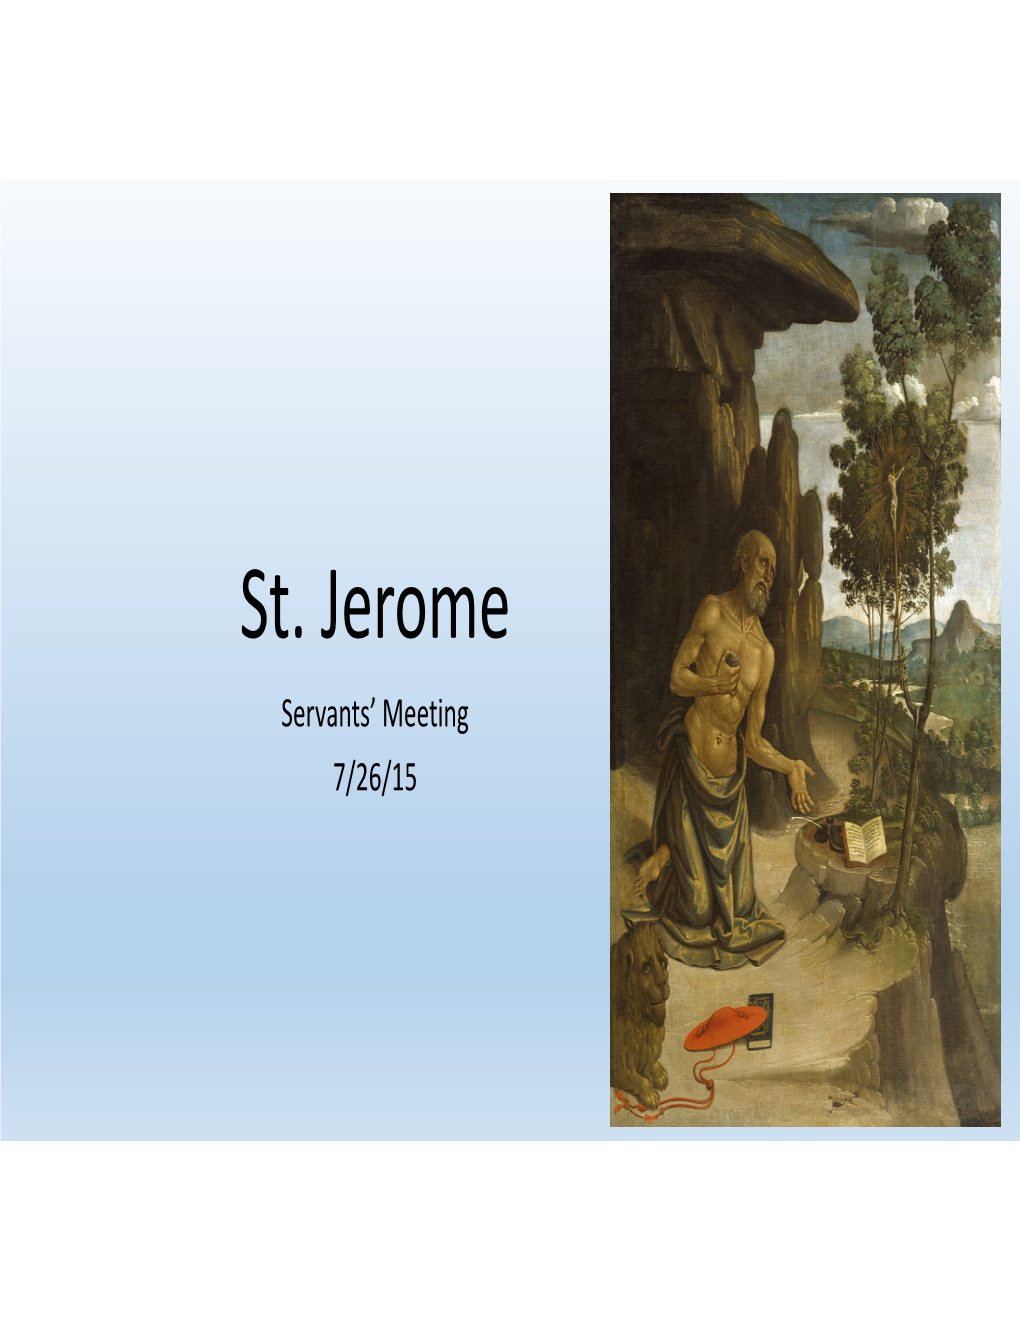 St. Jerome Servants’ Meeting 7/26/15 Early Life